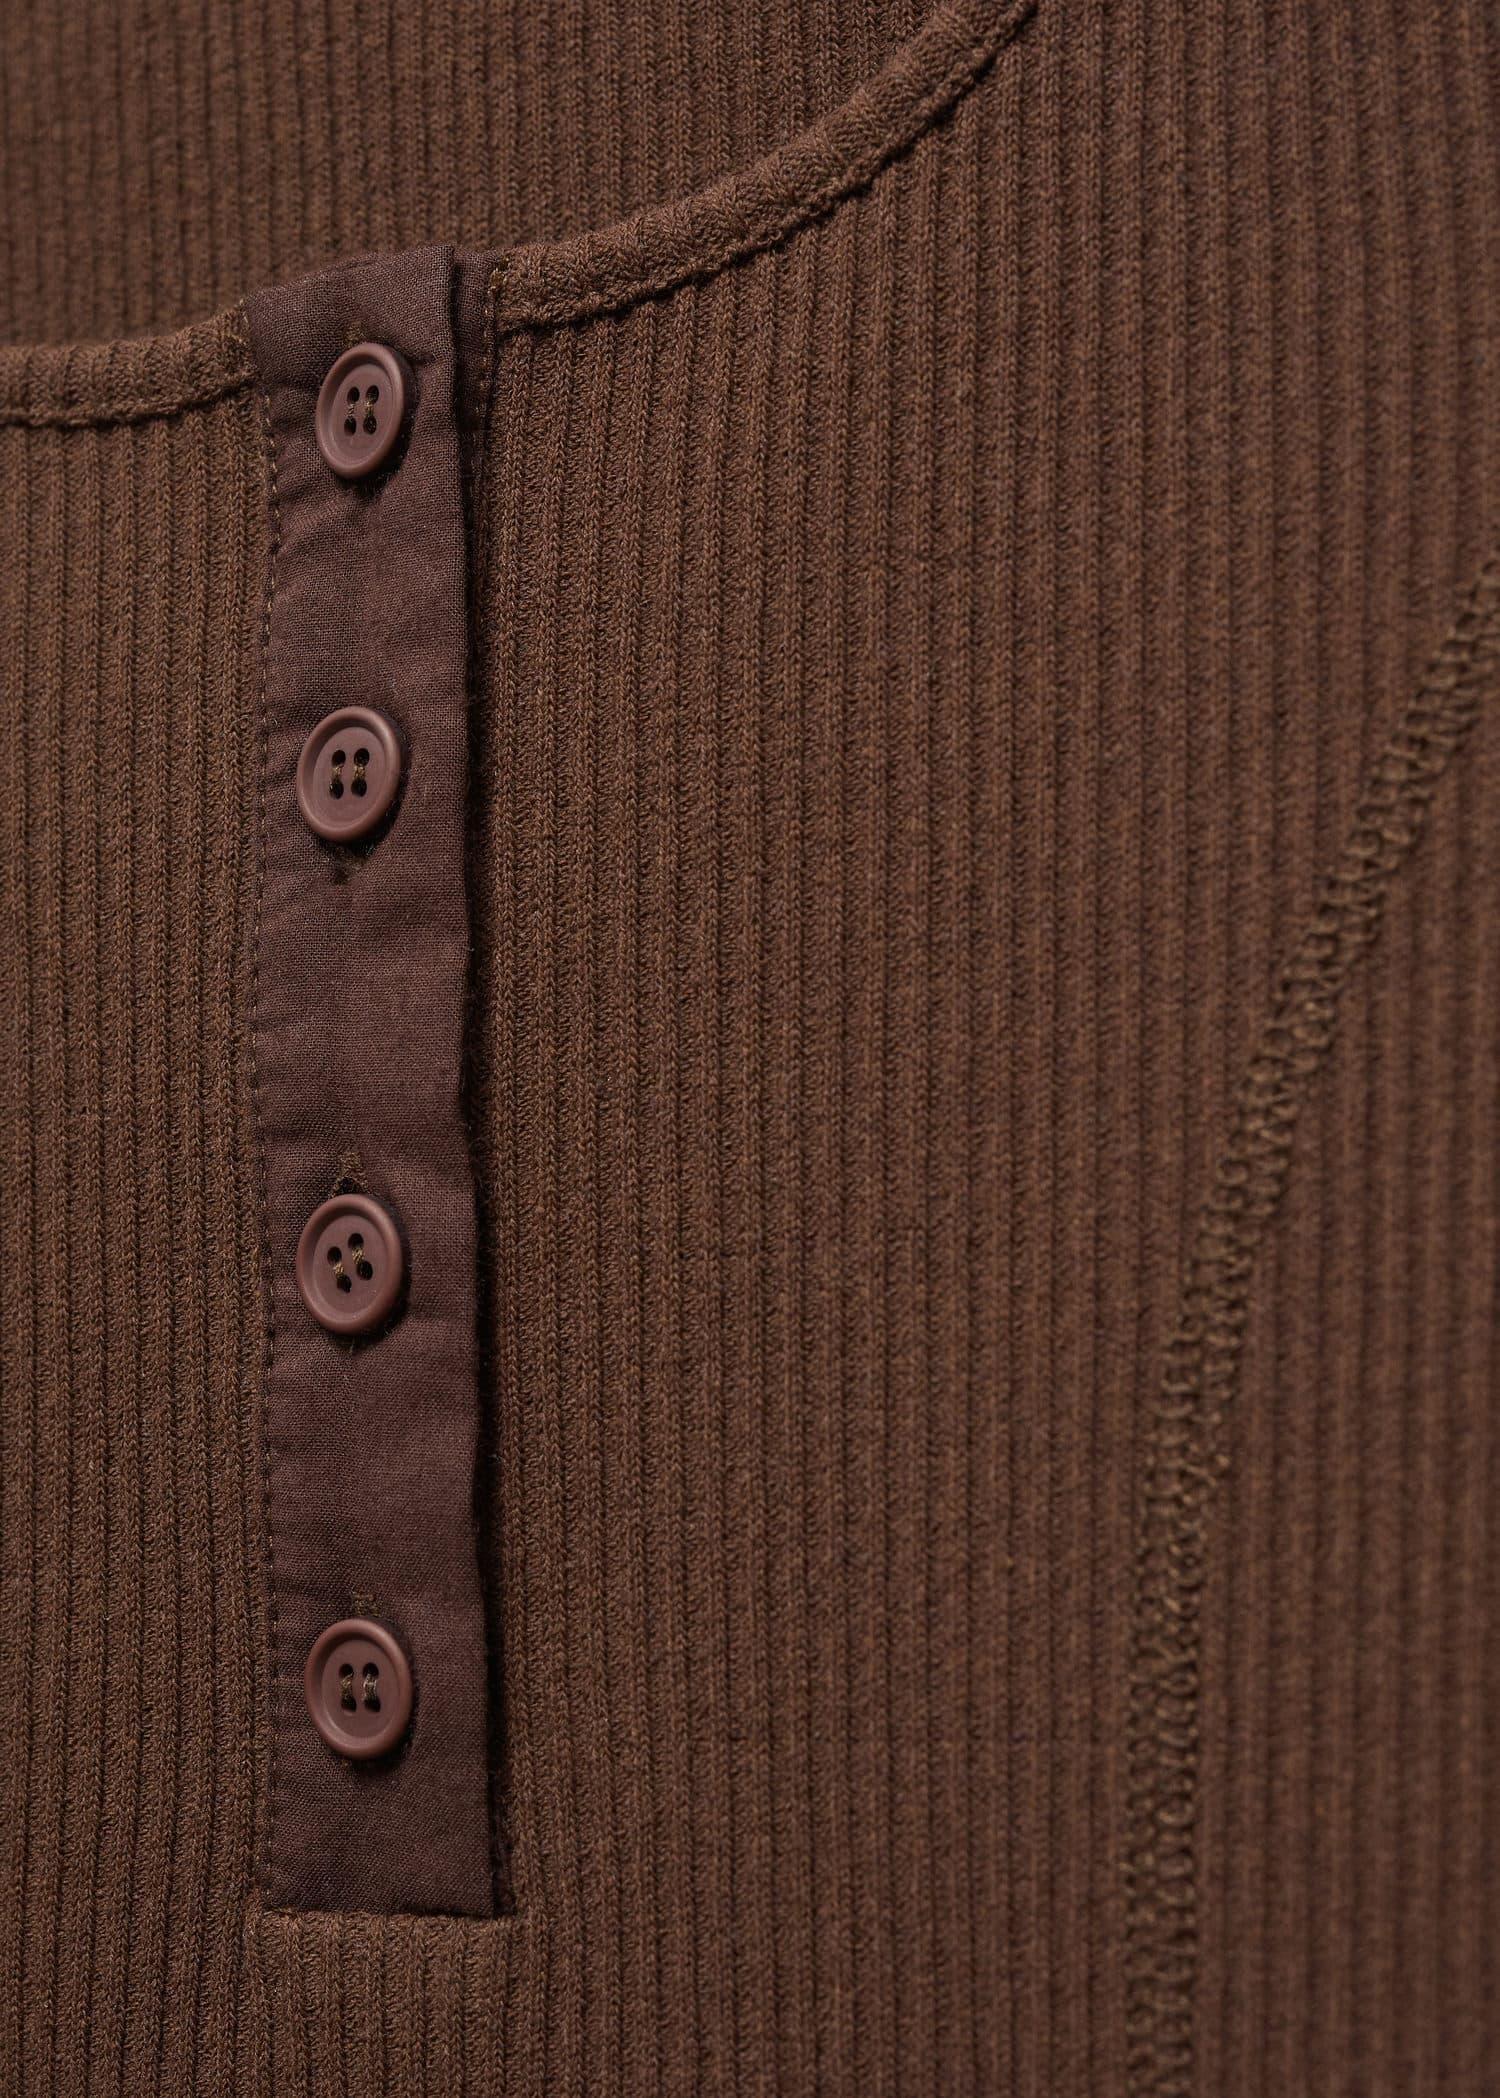 Mango - Brown Buttoned Ribbed Top